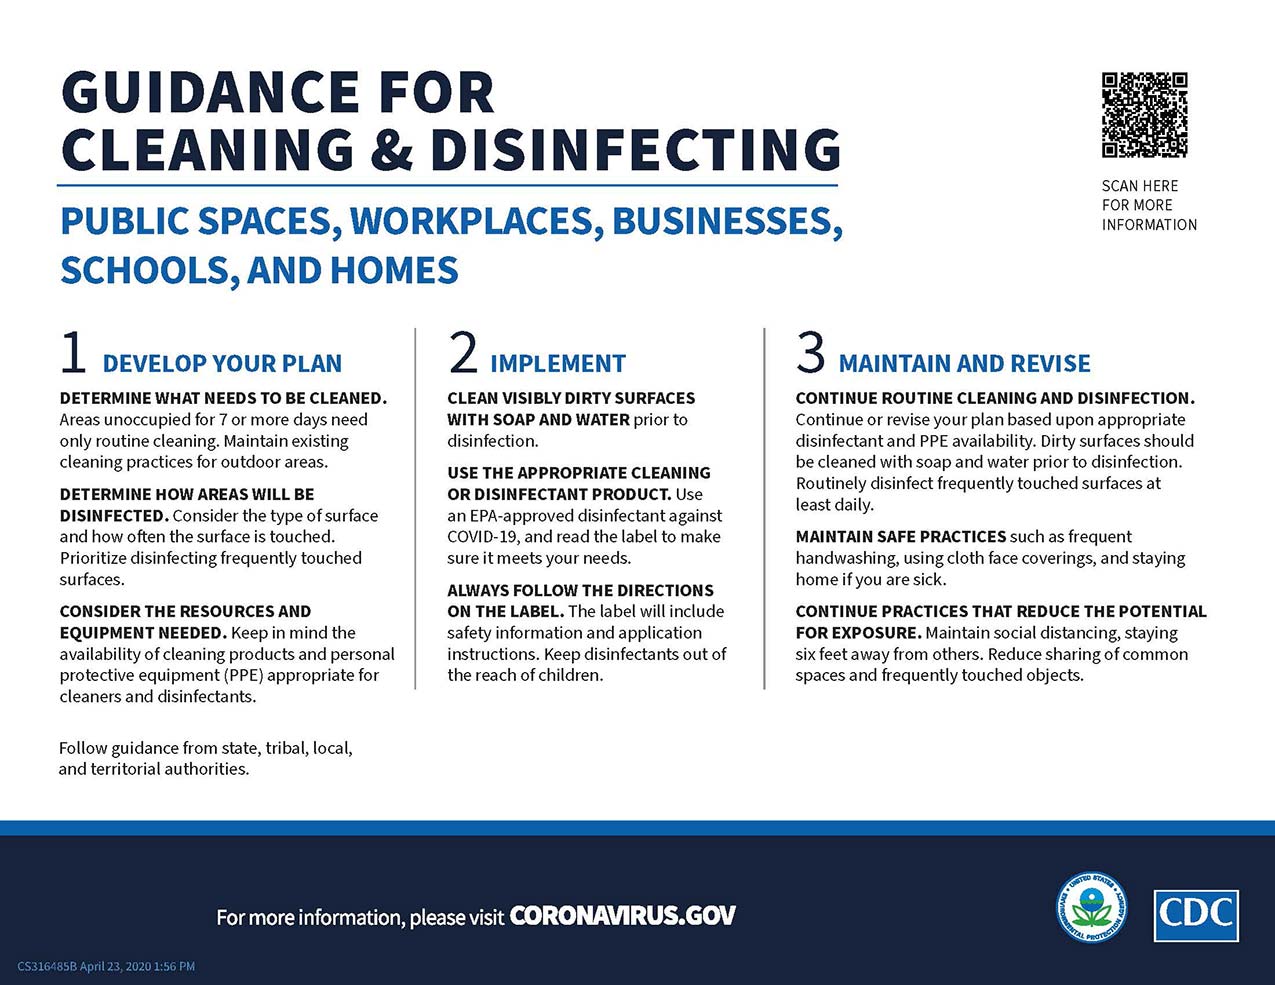 Guidance for cleaning and disinfecting